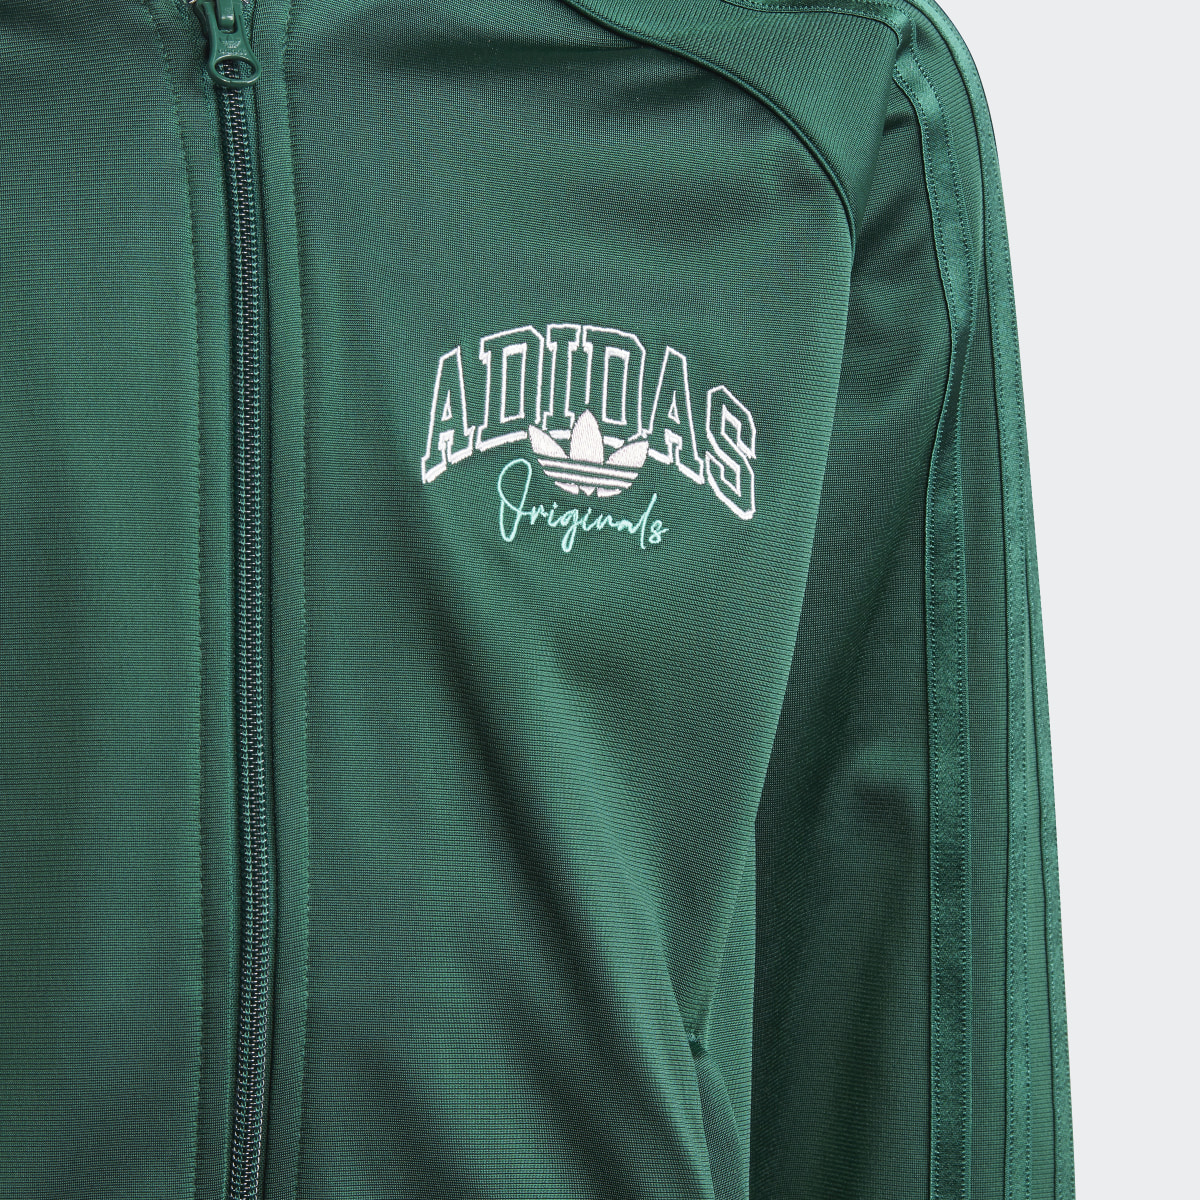 Adidas Collegiate Graphic Pack SST Track Top. 4